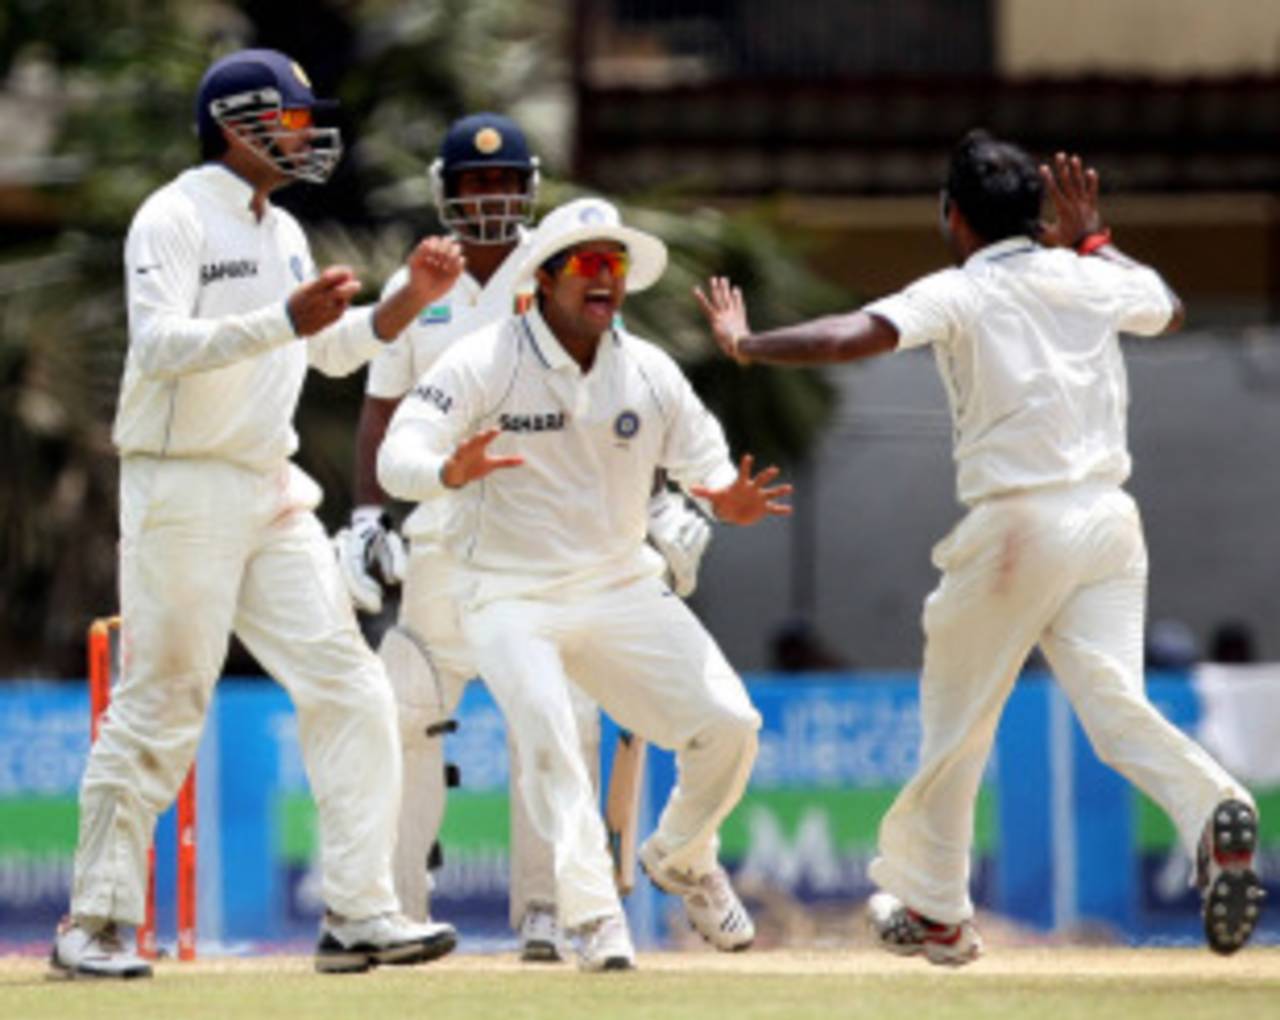 India's fielders are thrilled after Angelo Mathews gifted his wicket to Amit Mishra, Sri Lanka v India, 3rd Test, P Sara Oval, 4th day, August 6, 2010